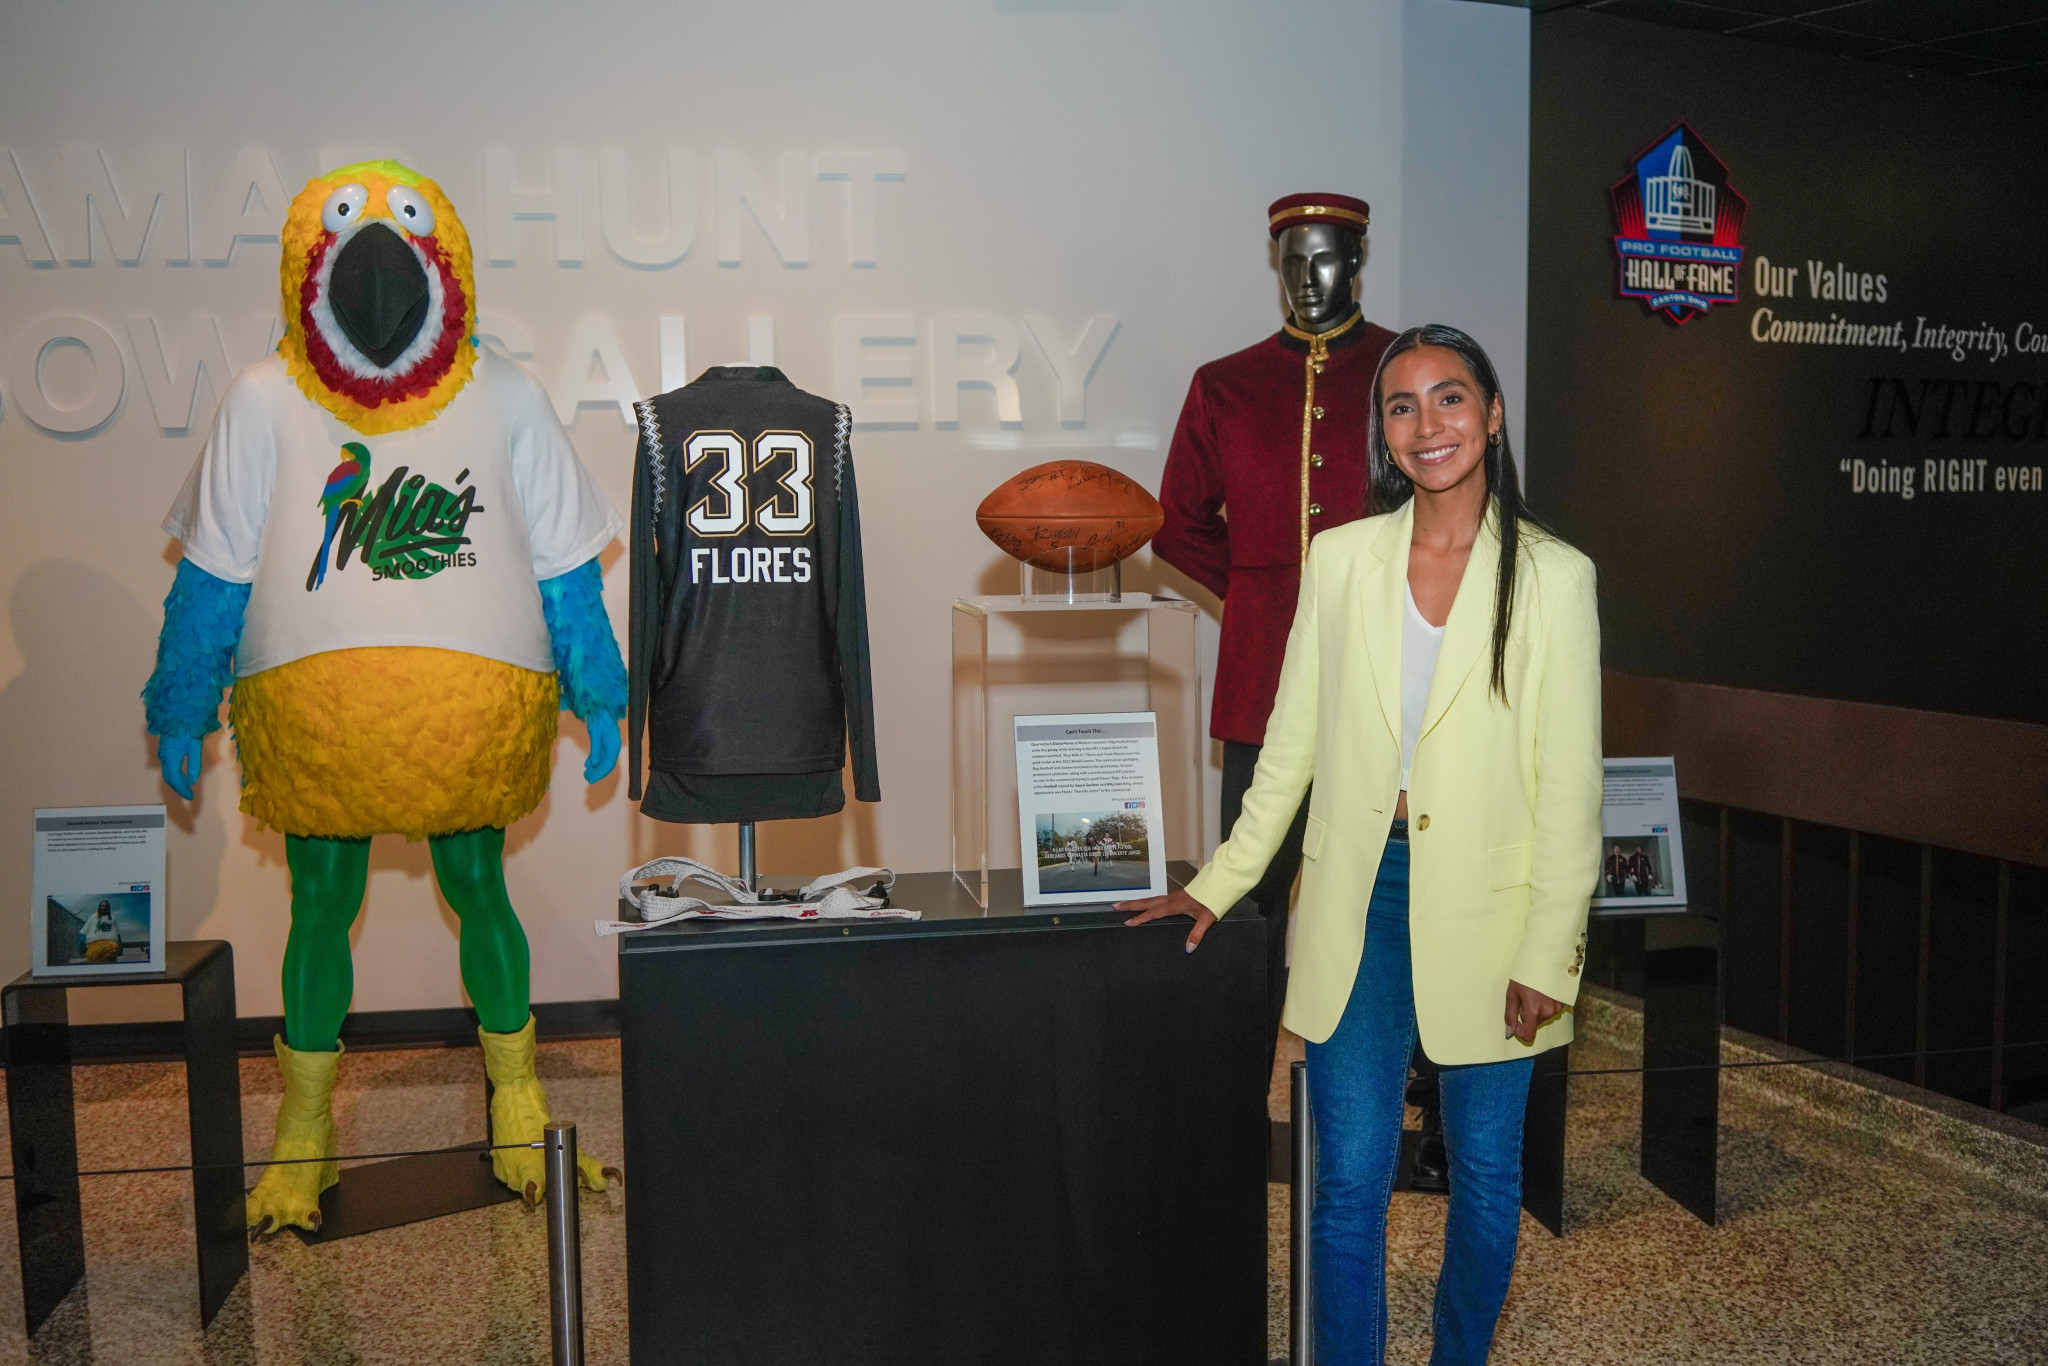 Mexico's Diana Flores is the first flag football player to feature in an exhibit at the Pro Football Hall of Fame in Canton ©NFL